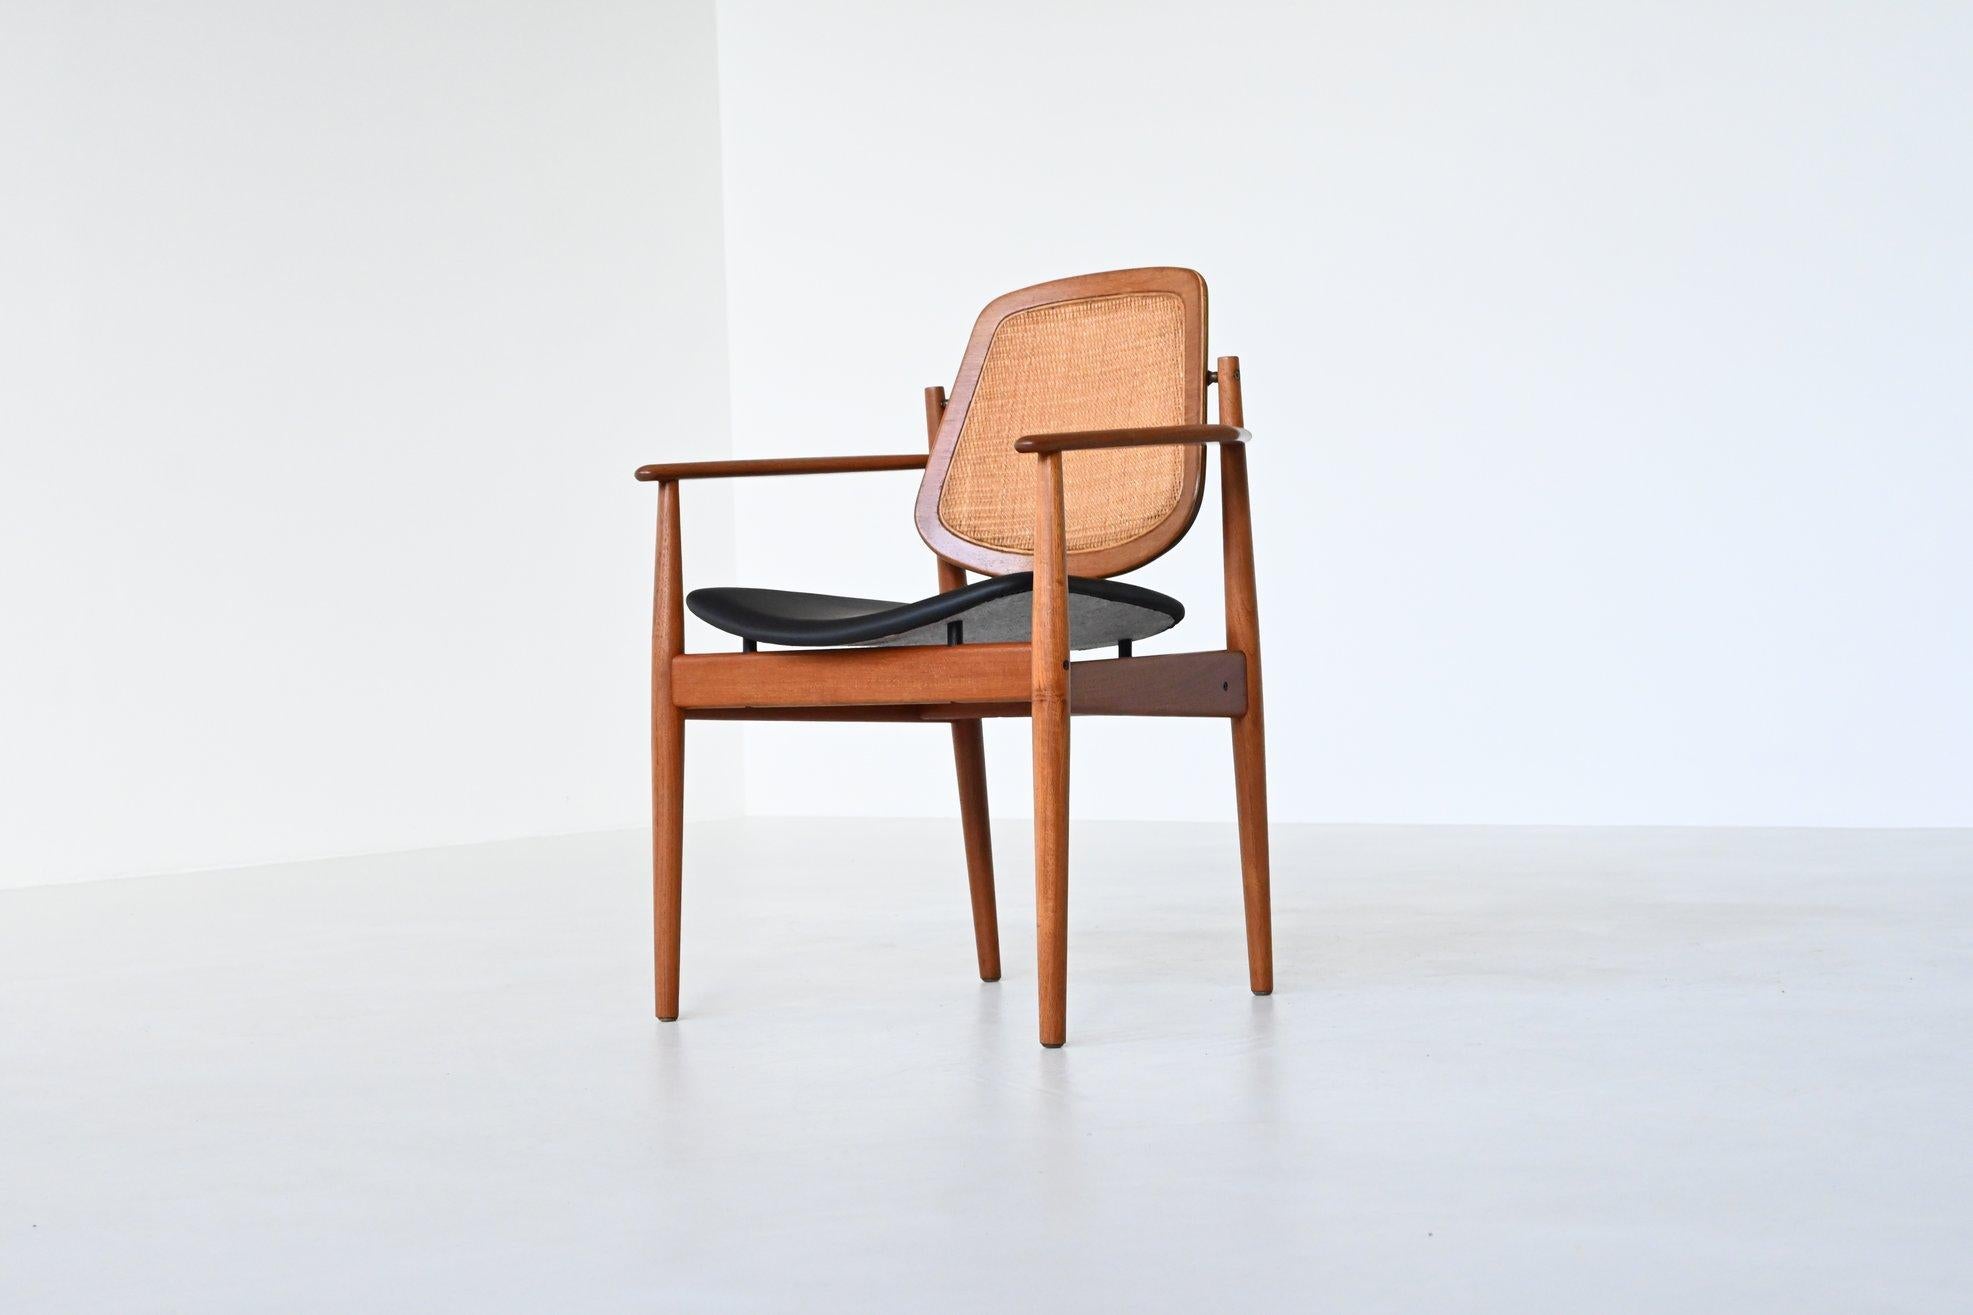 Rare and incredible armchair model FD-186 designed by Arne Vodder for France & Søn, Denmark 1957. This armchair has a base made of solid teak wood and the seat is newly upholstered in high quality black leather which contrasts beautifully with the